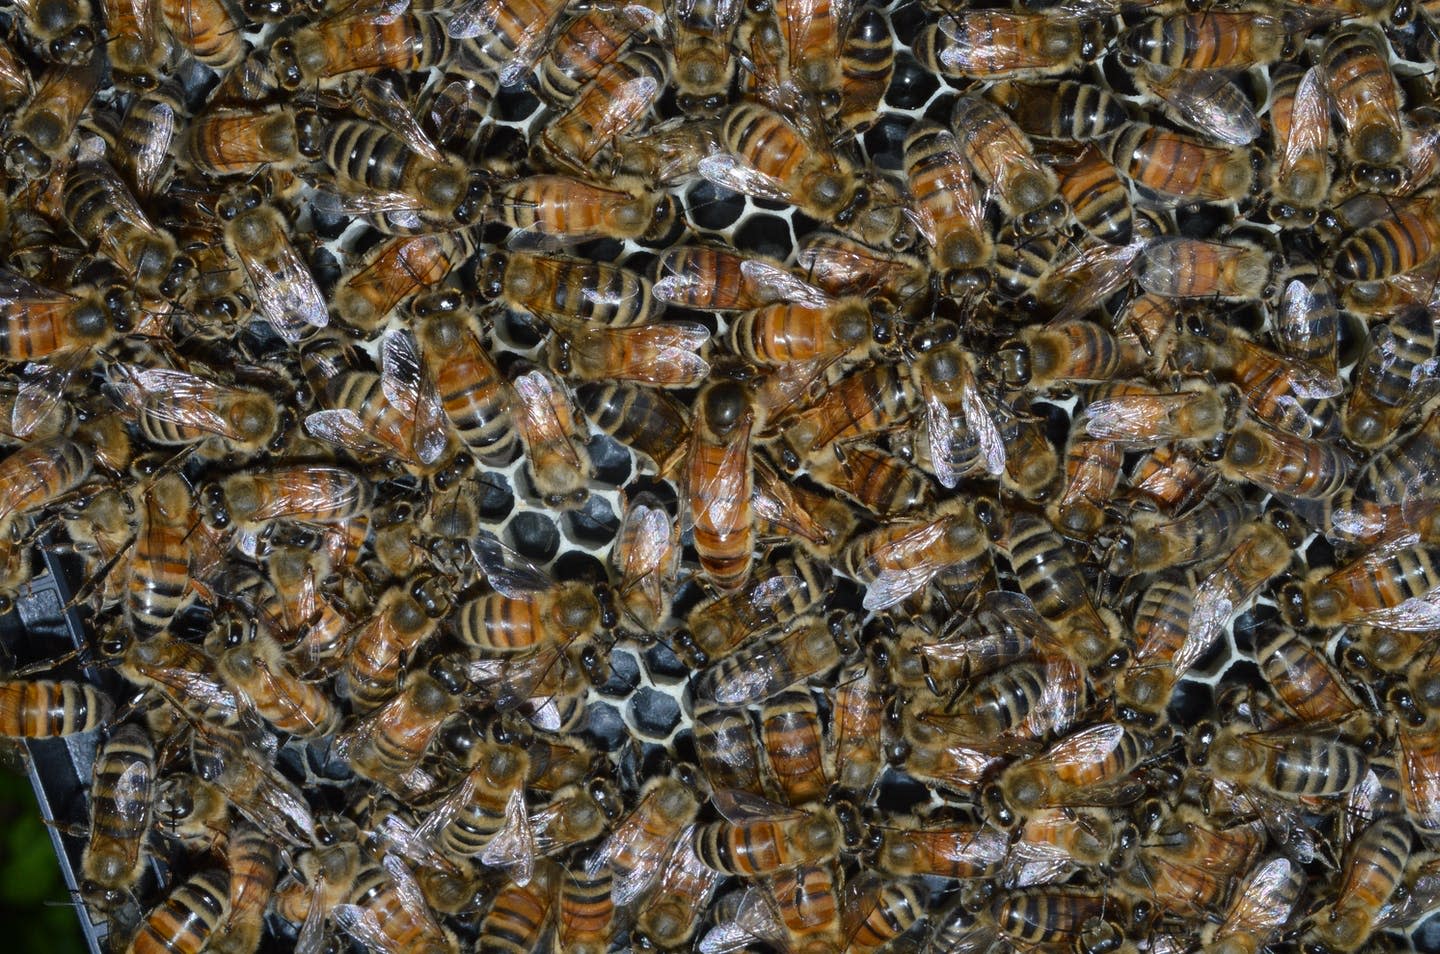 Honey bees can’t practice social distancing, so they stay healthy in close quarters by working together